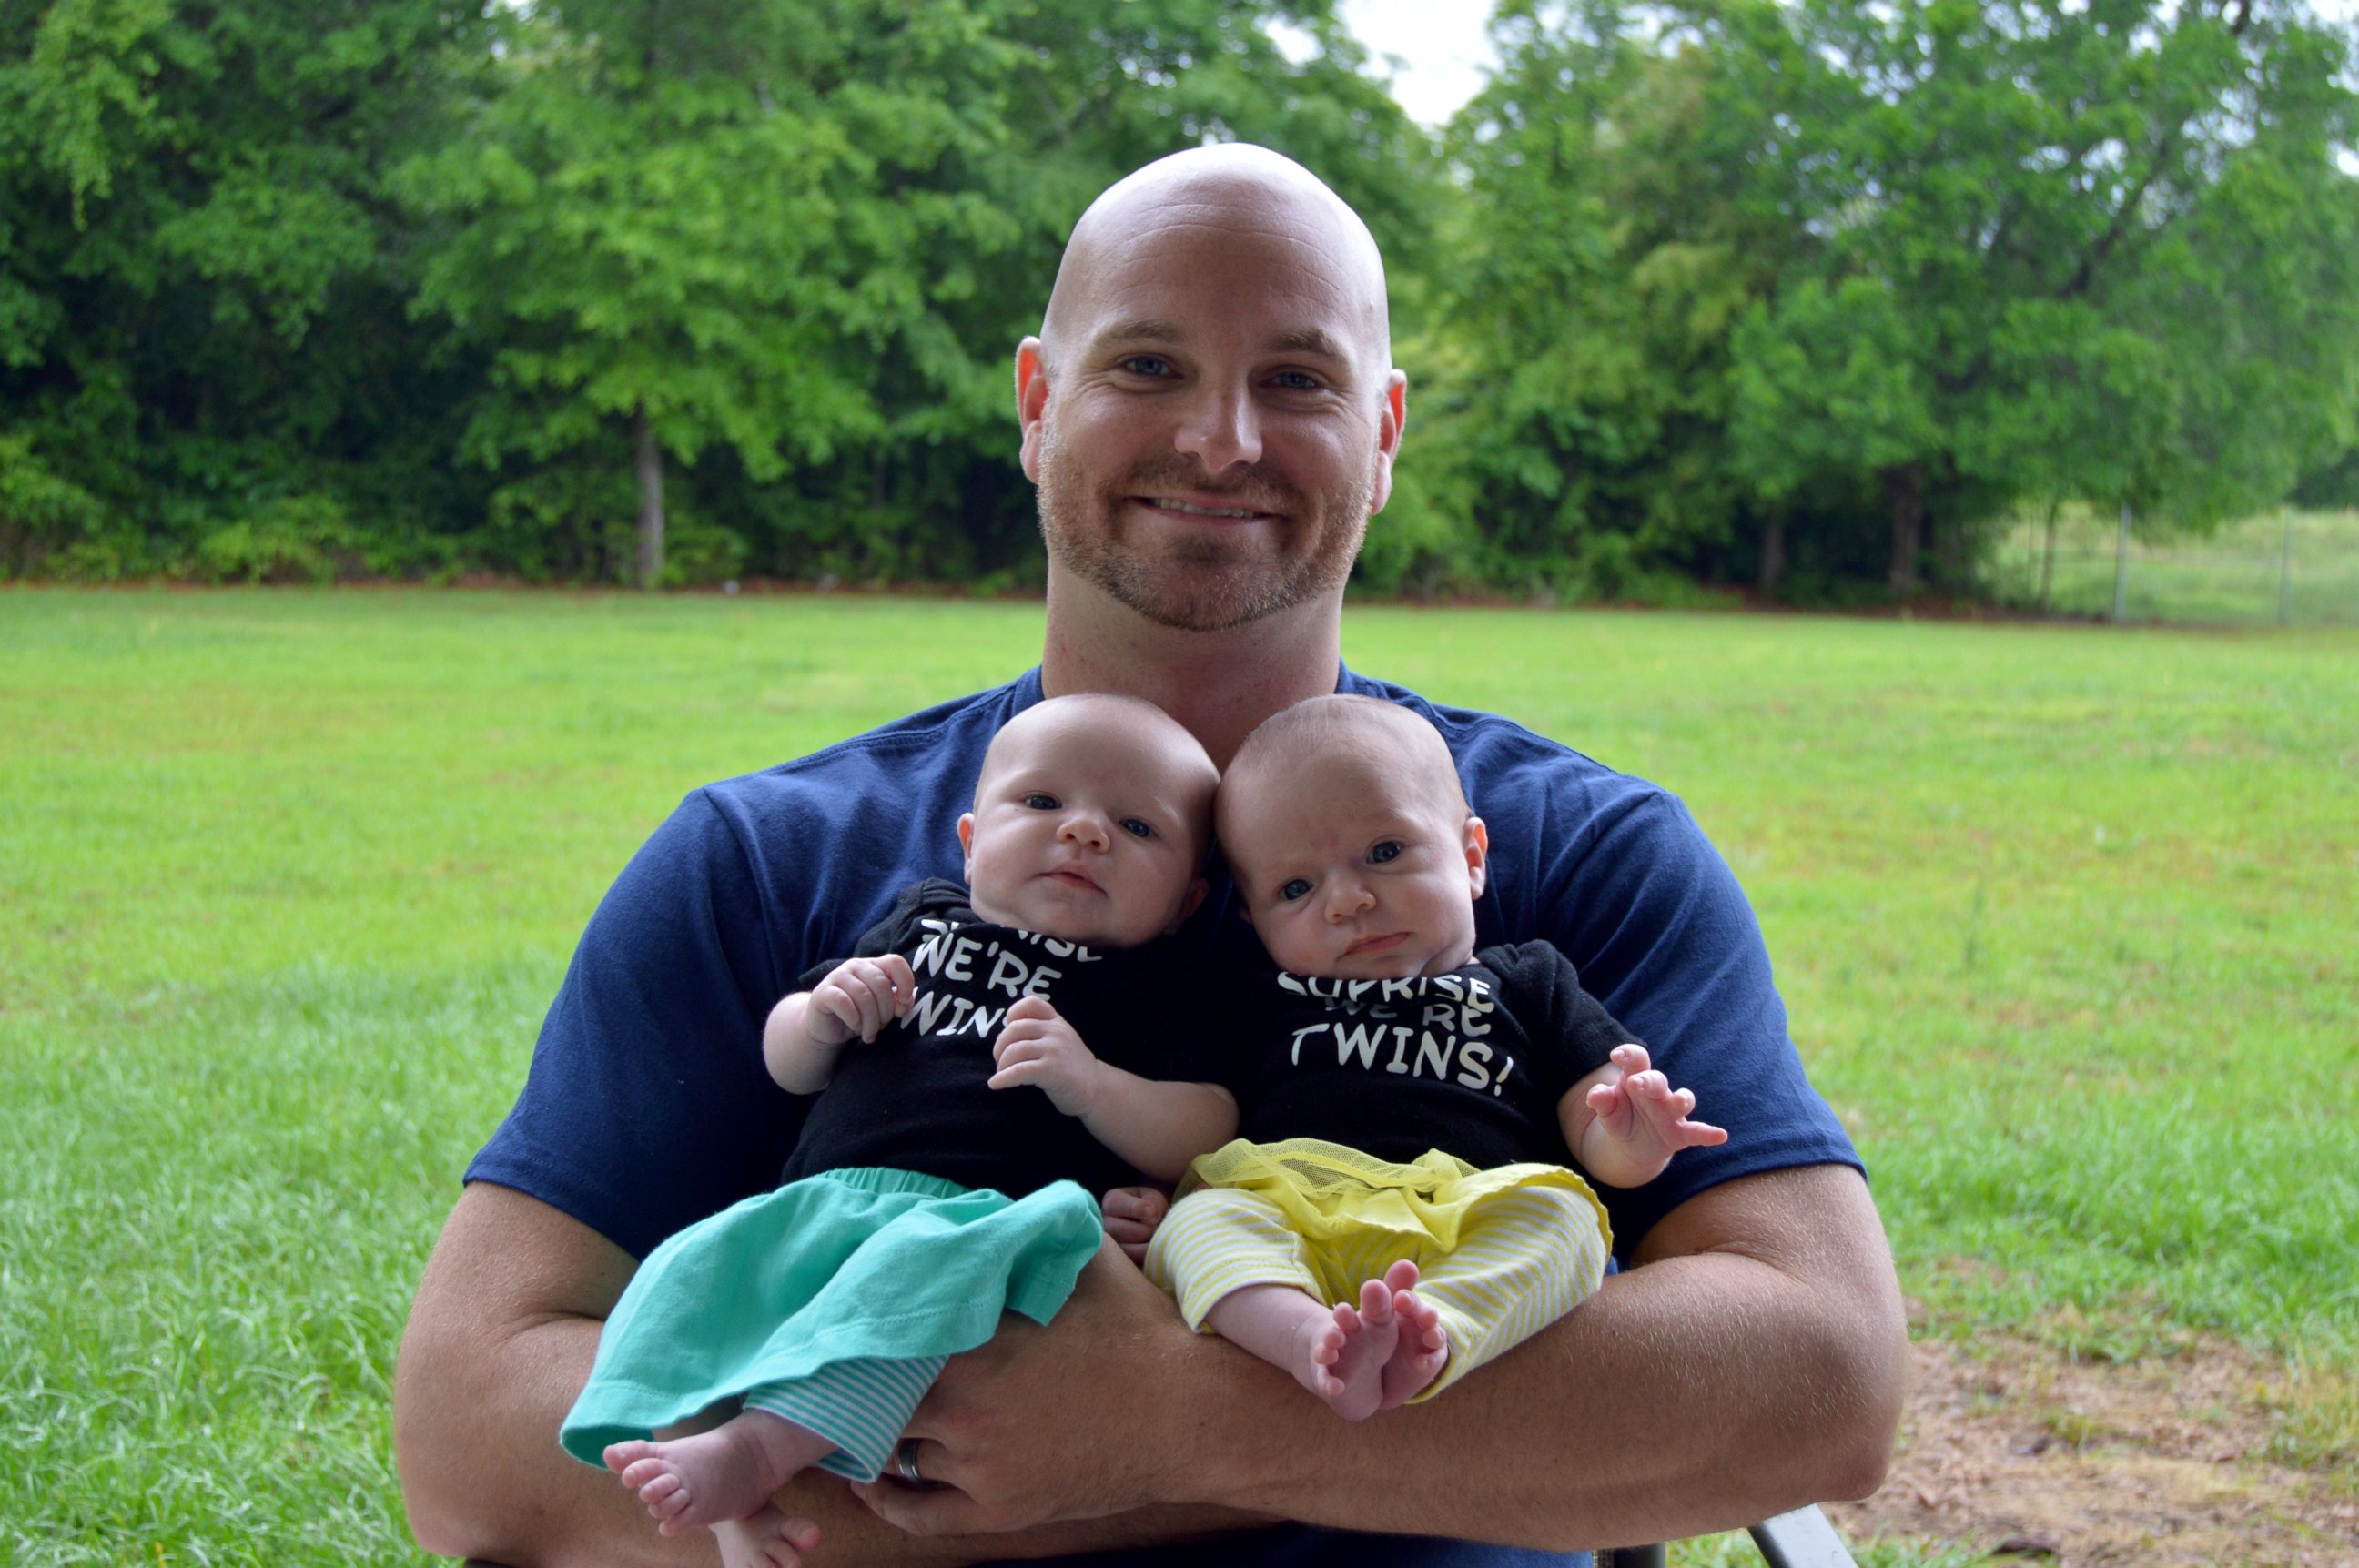 PHOTO: Sharon and Korey Rademacher decided to surprise their friends and family with "secret twins" when they found out they would be having not one, but two children.